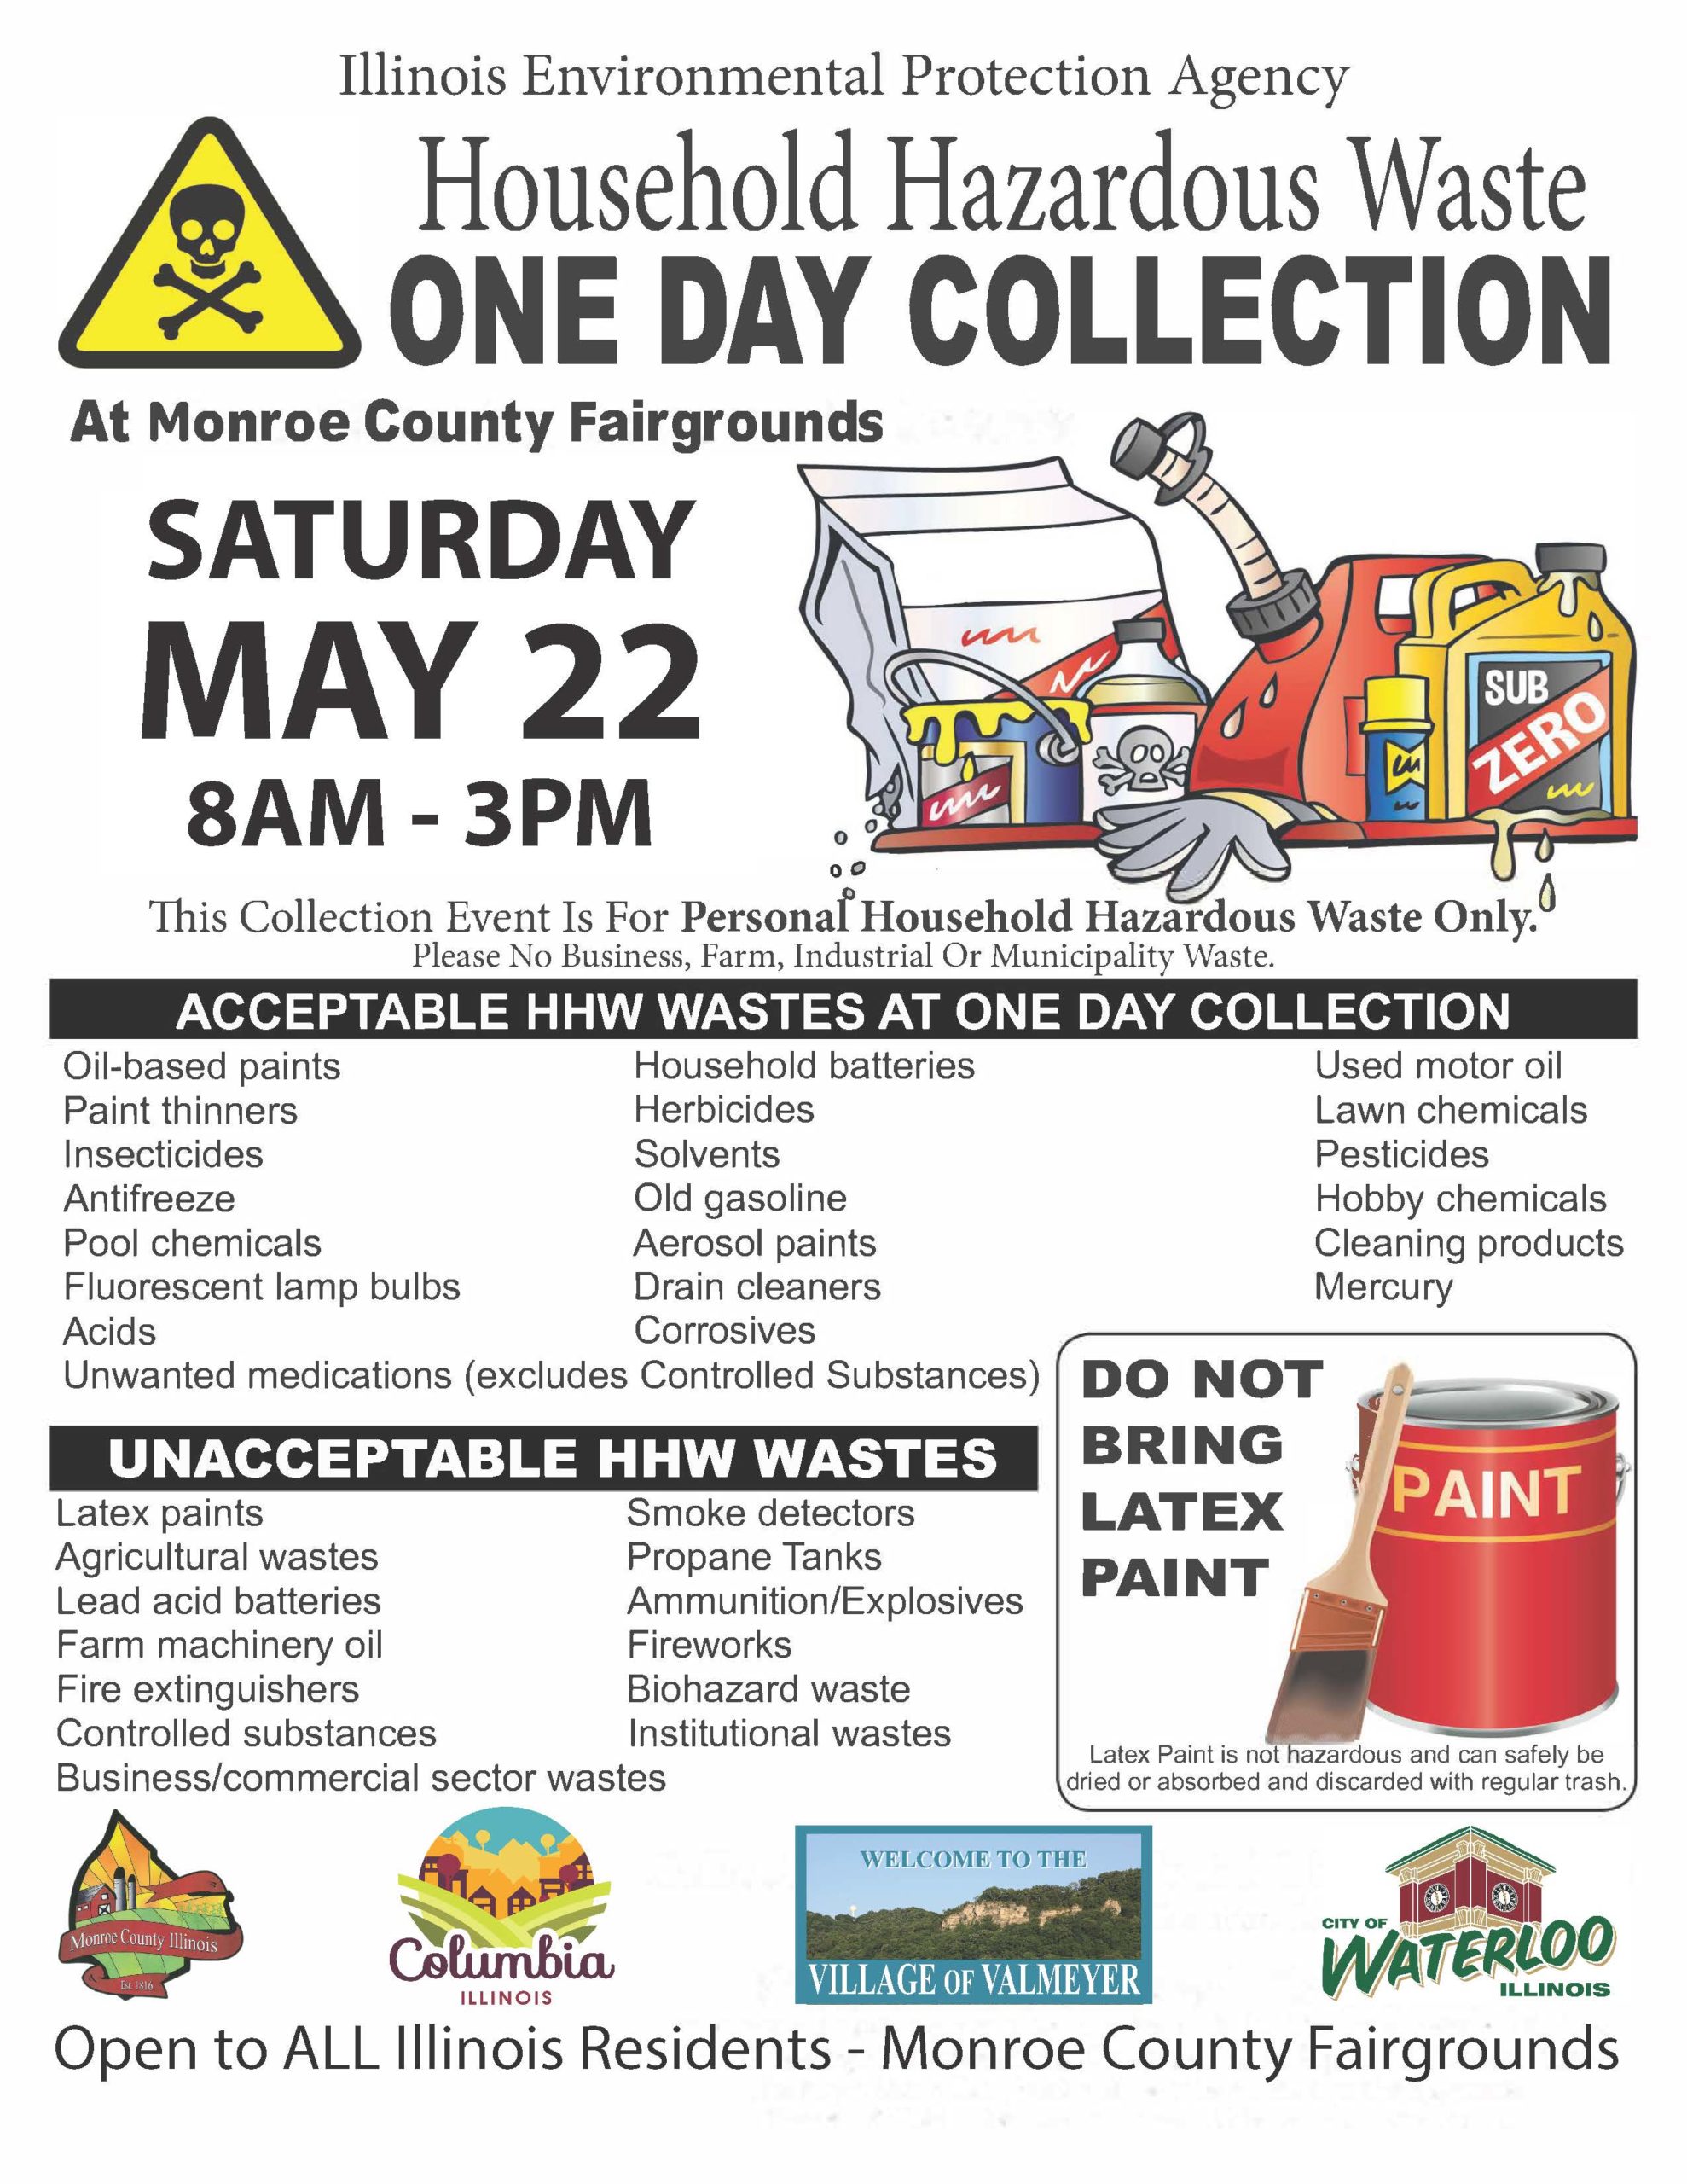 Household Hazardous Waste One Day Collection City of Waterloo, IL